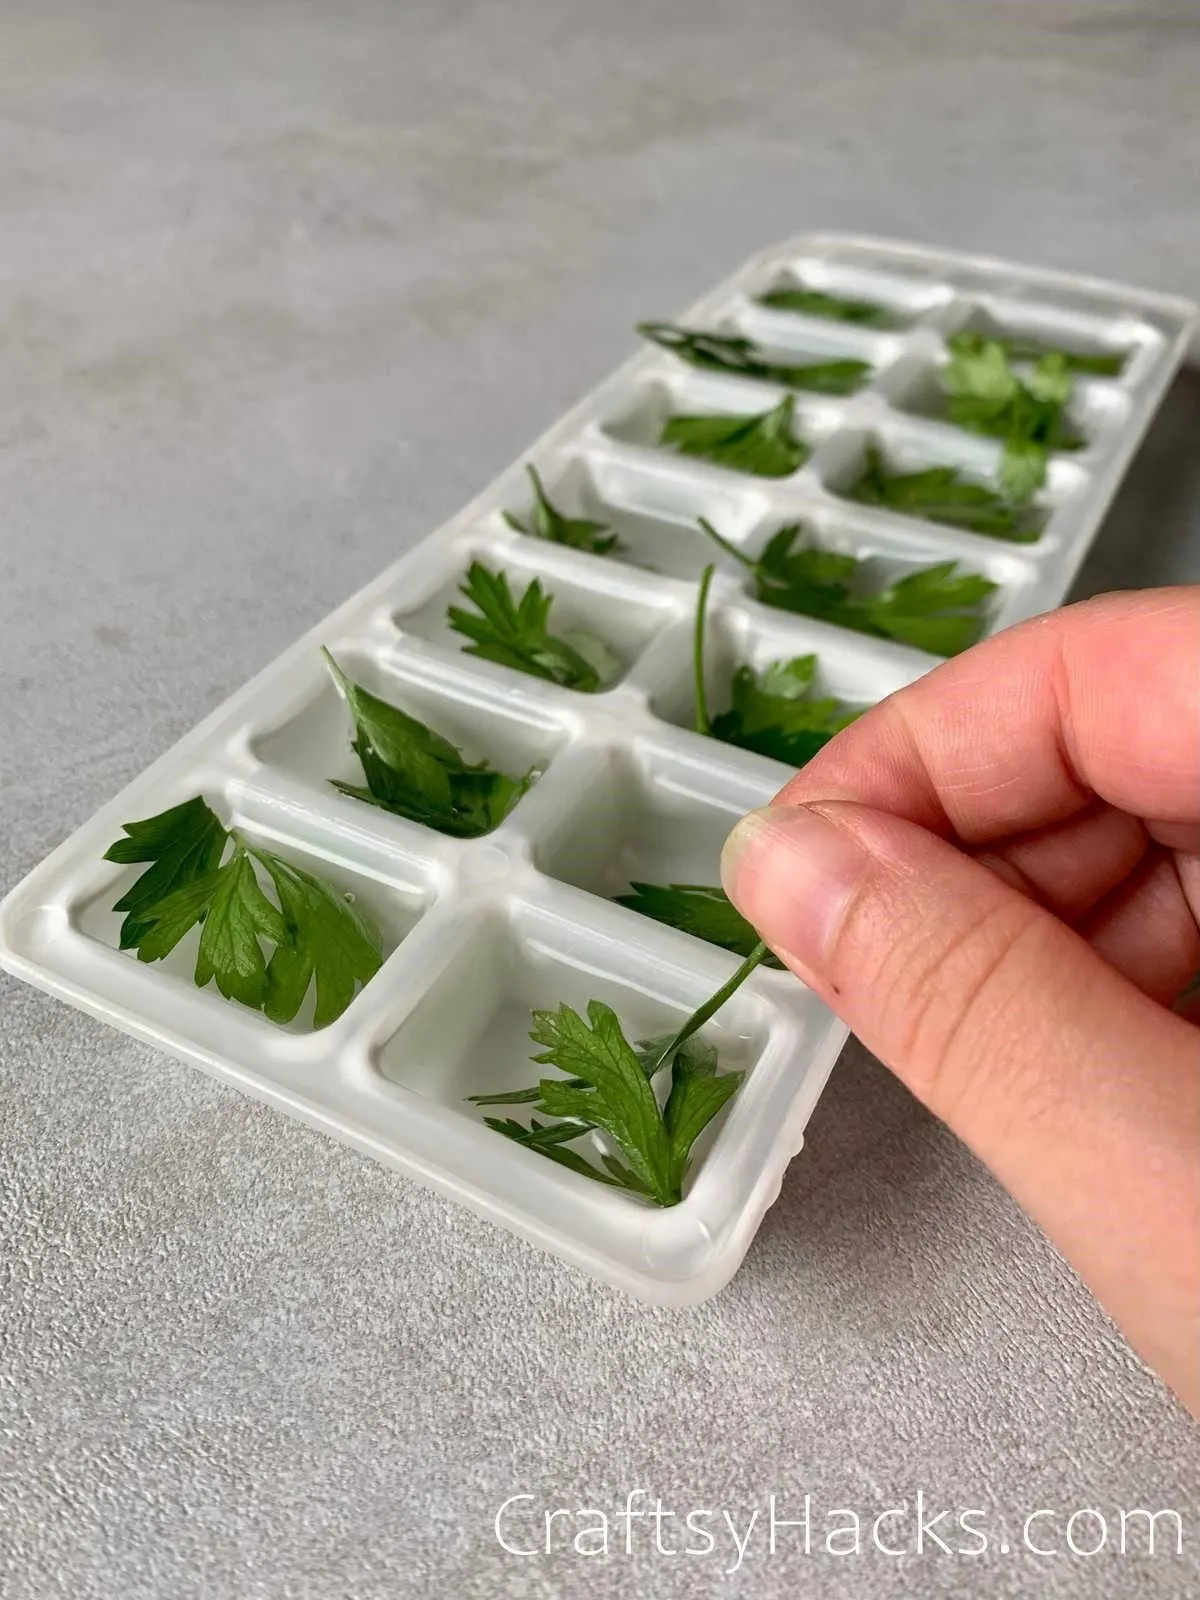 freeze herbs for future cooking